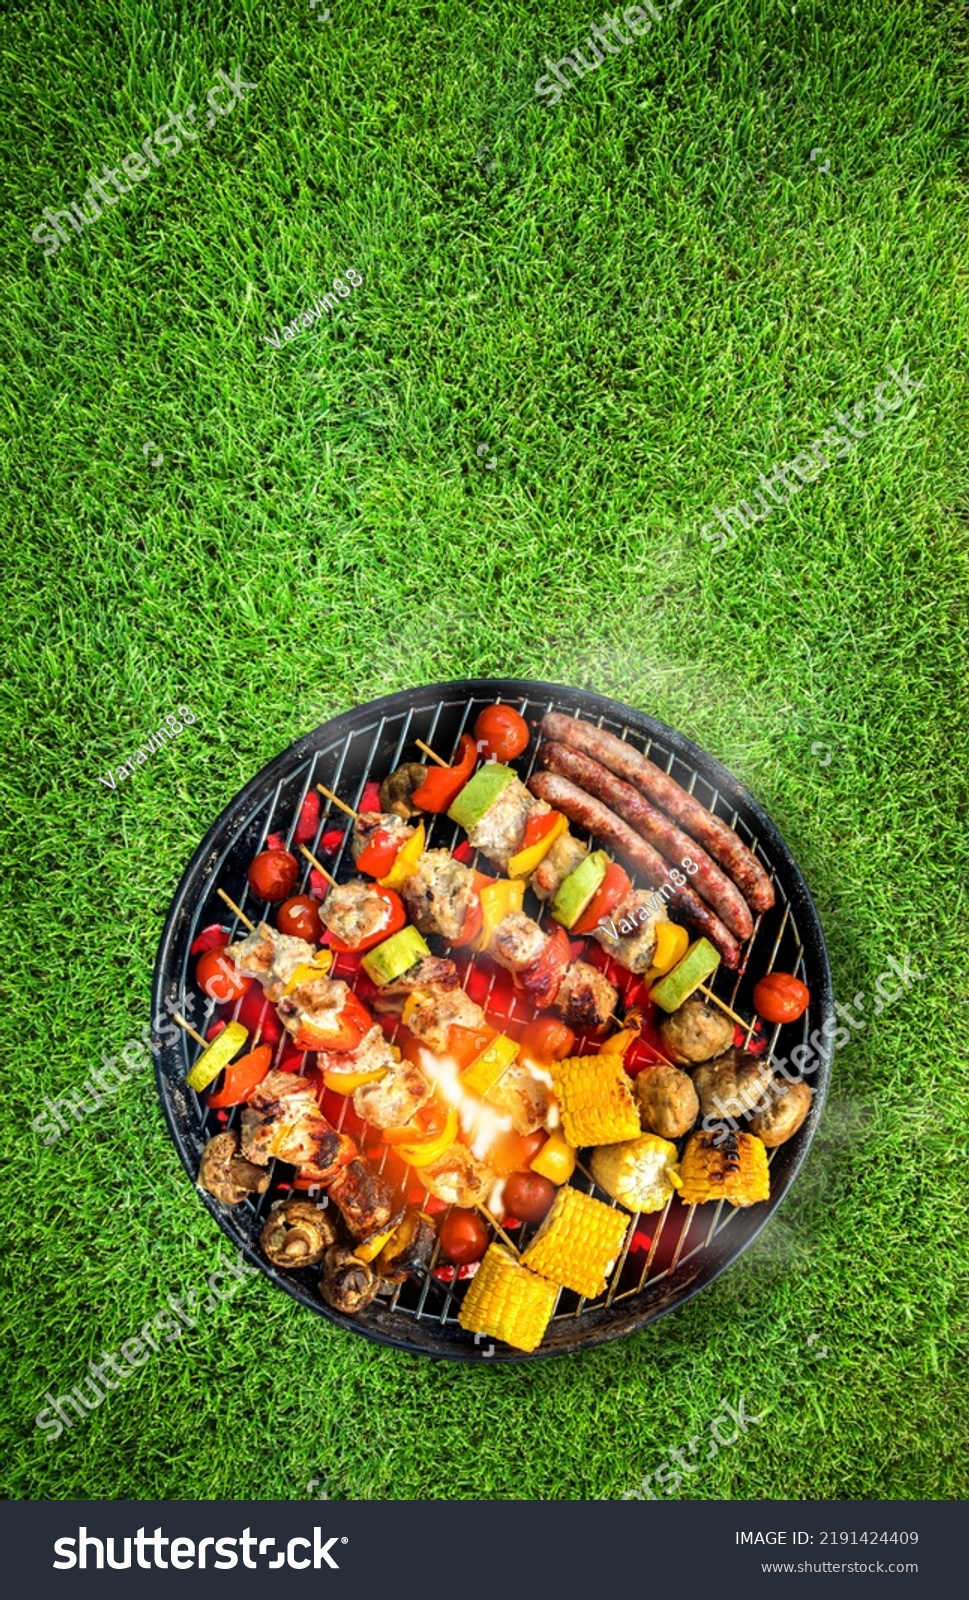 Top view of bbq grill, grilled meat, vegetables, mushrooms with flames and smoke. Placed on green grass lawn. Grilled food, vertical composition. #2191424409